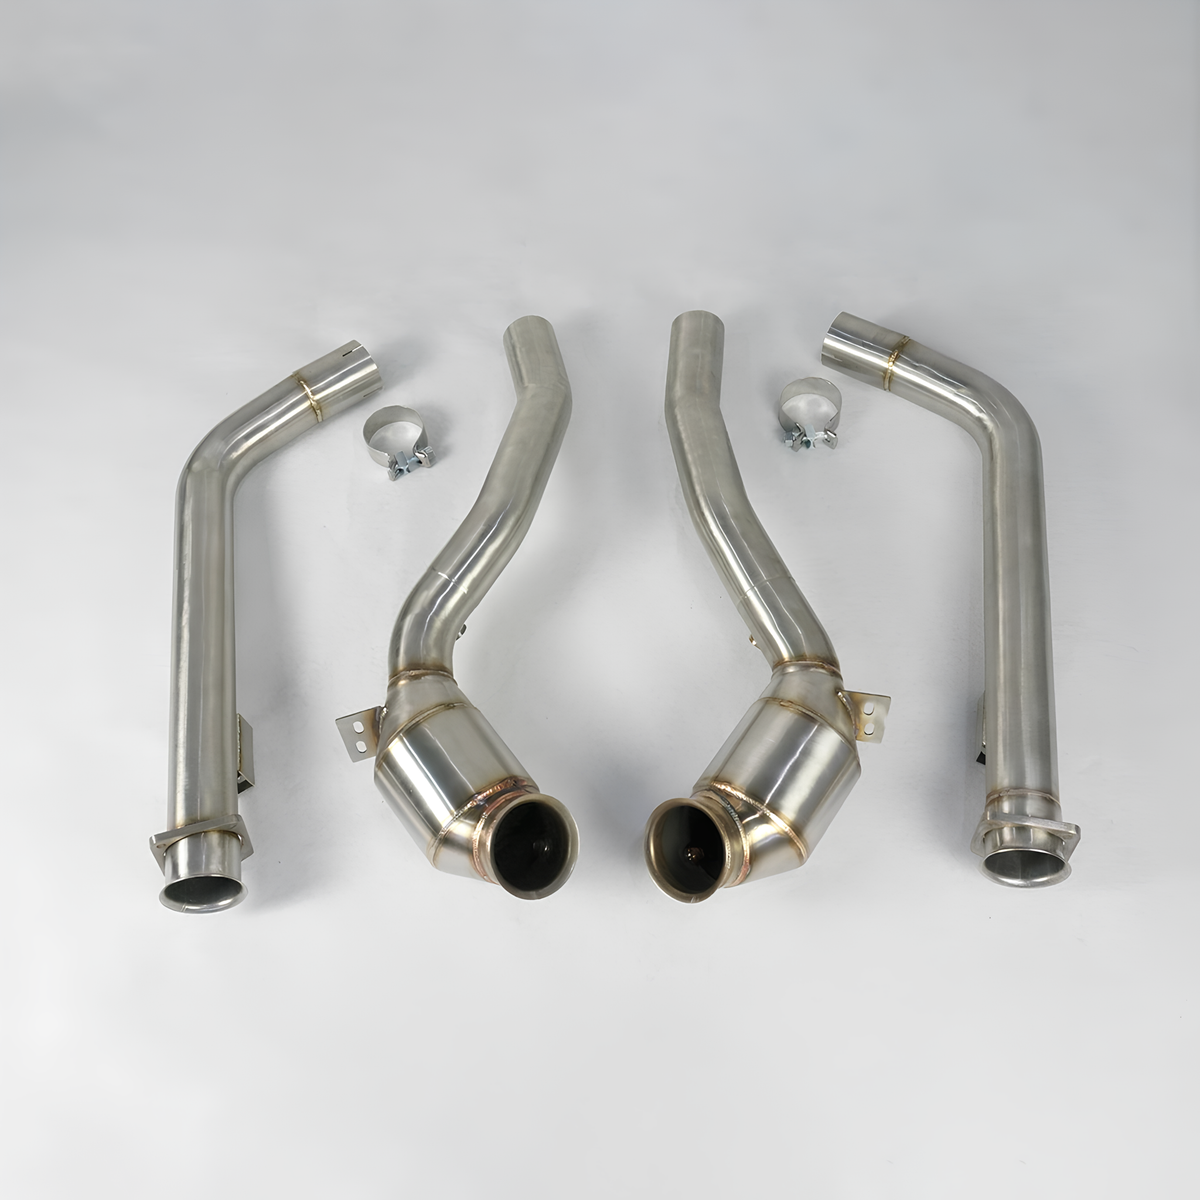 Rstype catless Downpipe Mercedes Benz G500 W463 V8 4.0T Downpipe kit 2016~2018